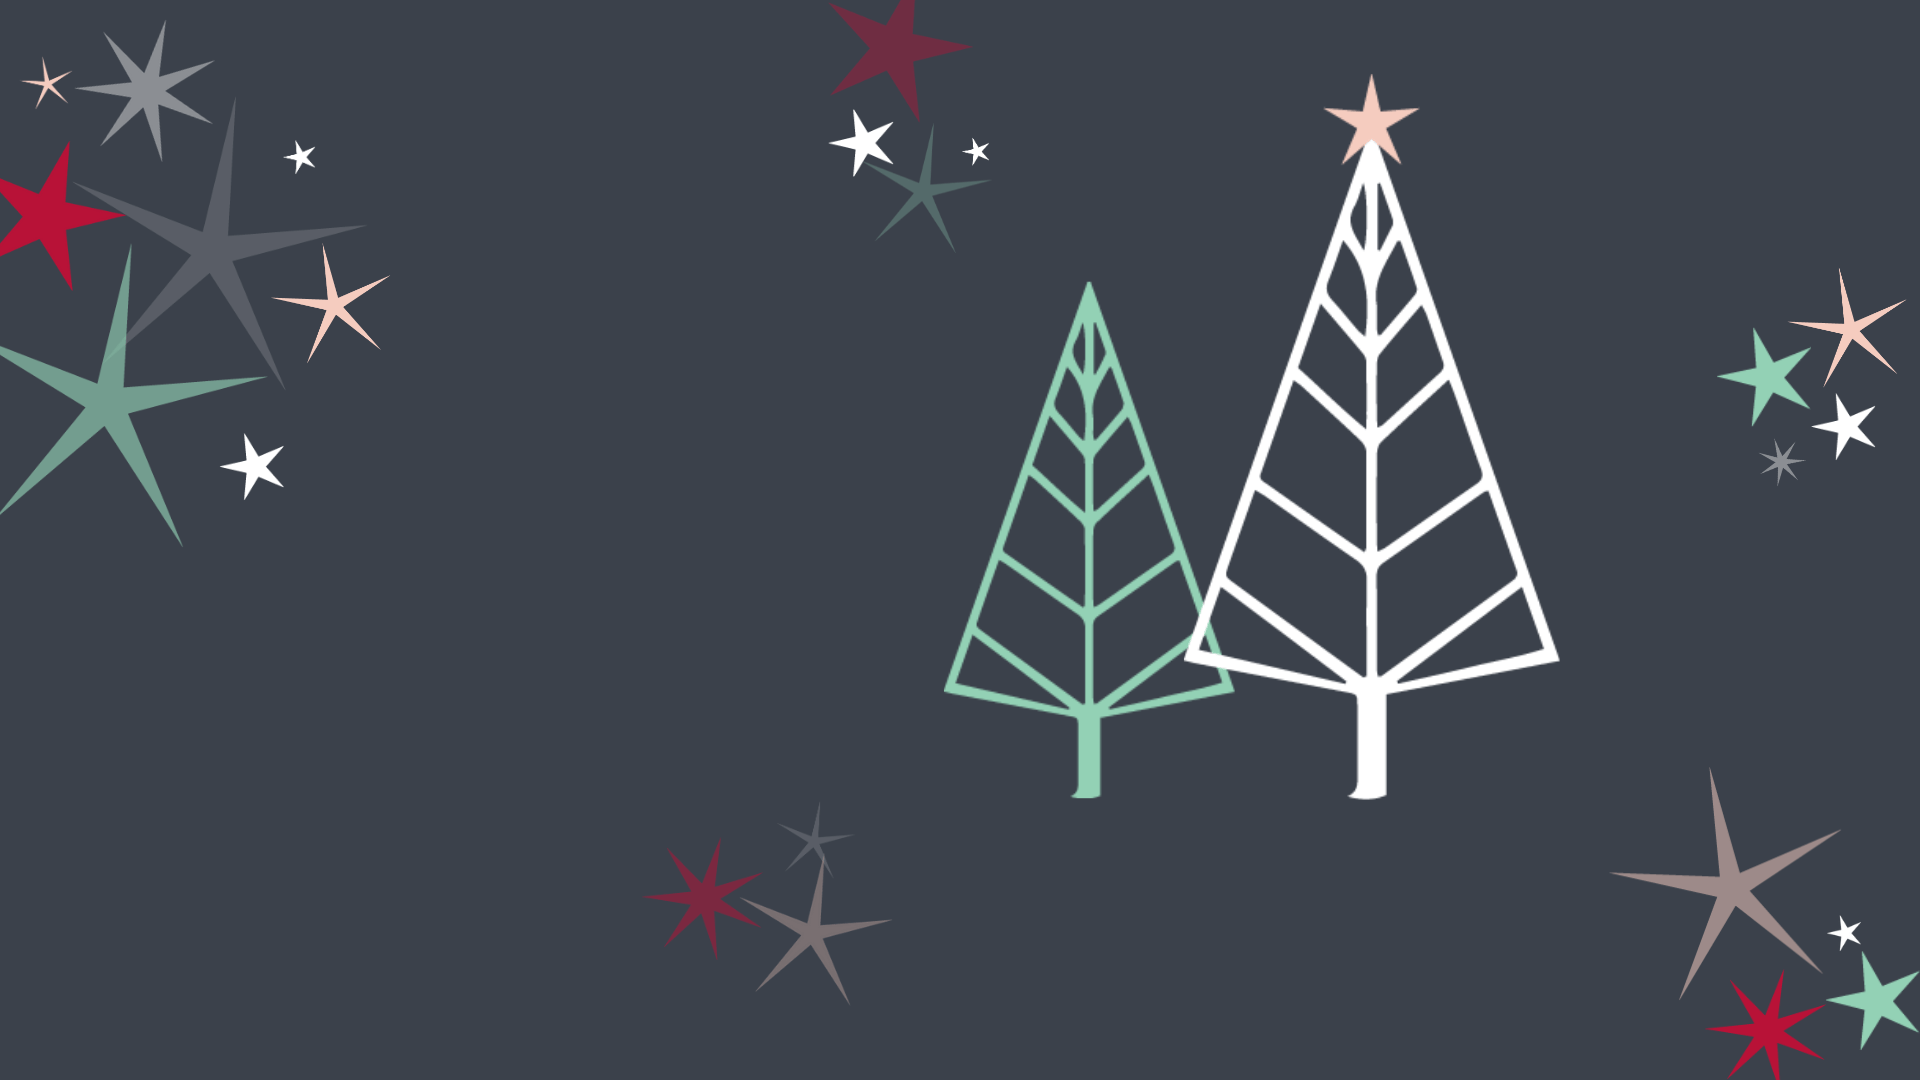 Illustration of Christmas trees surrounded by stars